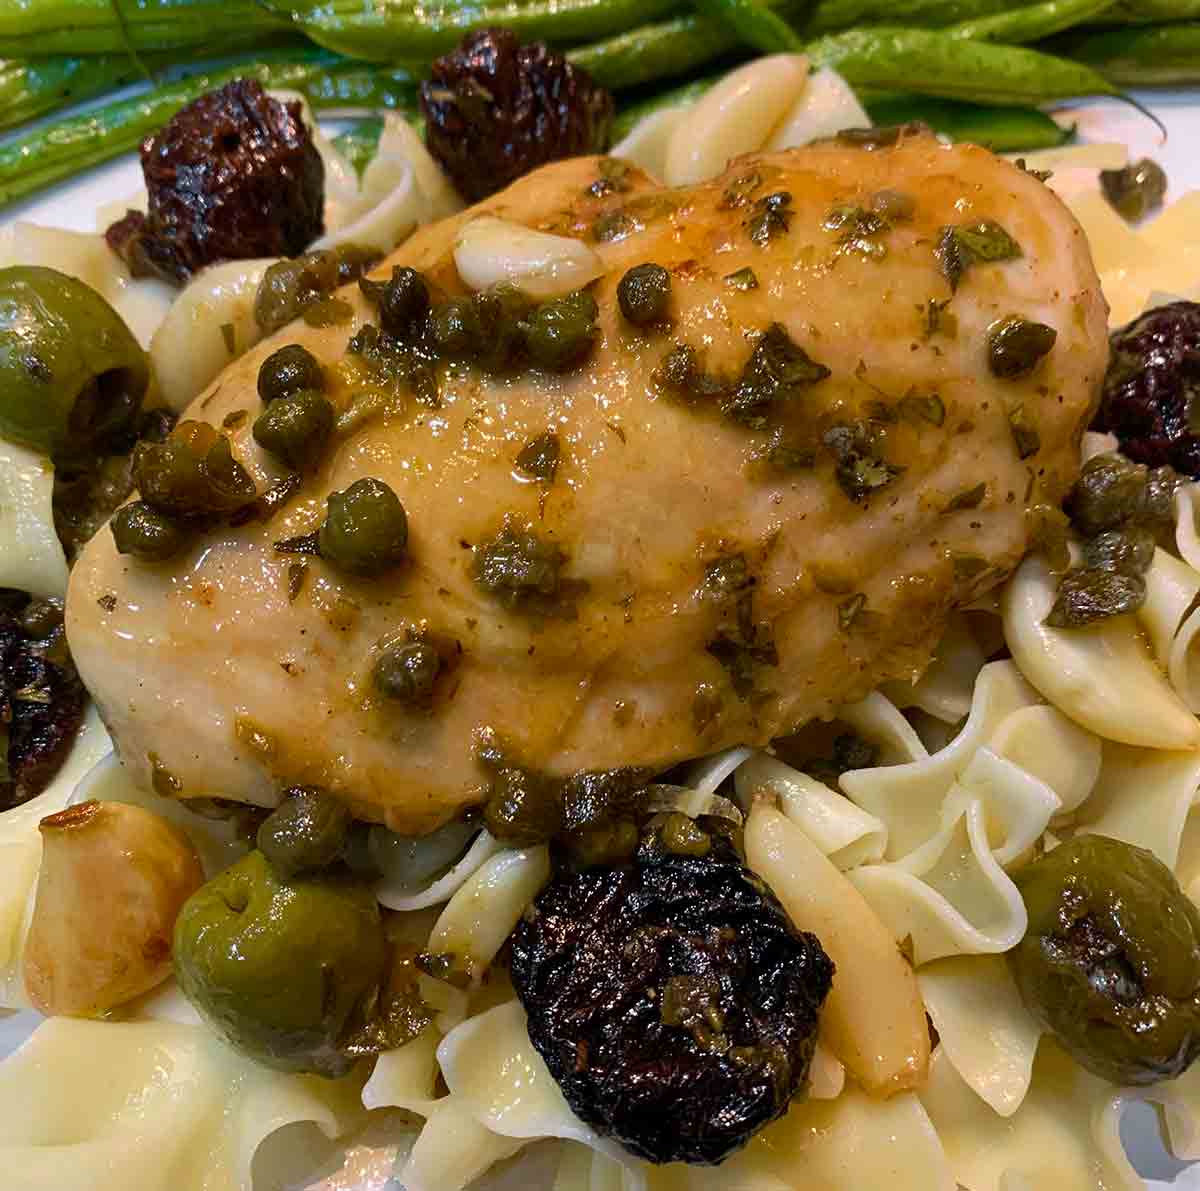 A pieces of modern chicken Marbella on egg noodles with green beans on the side.